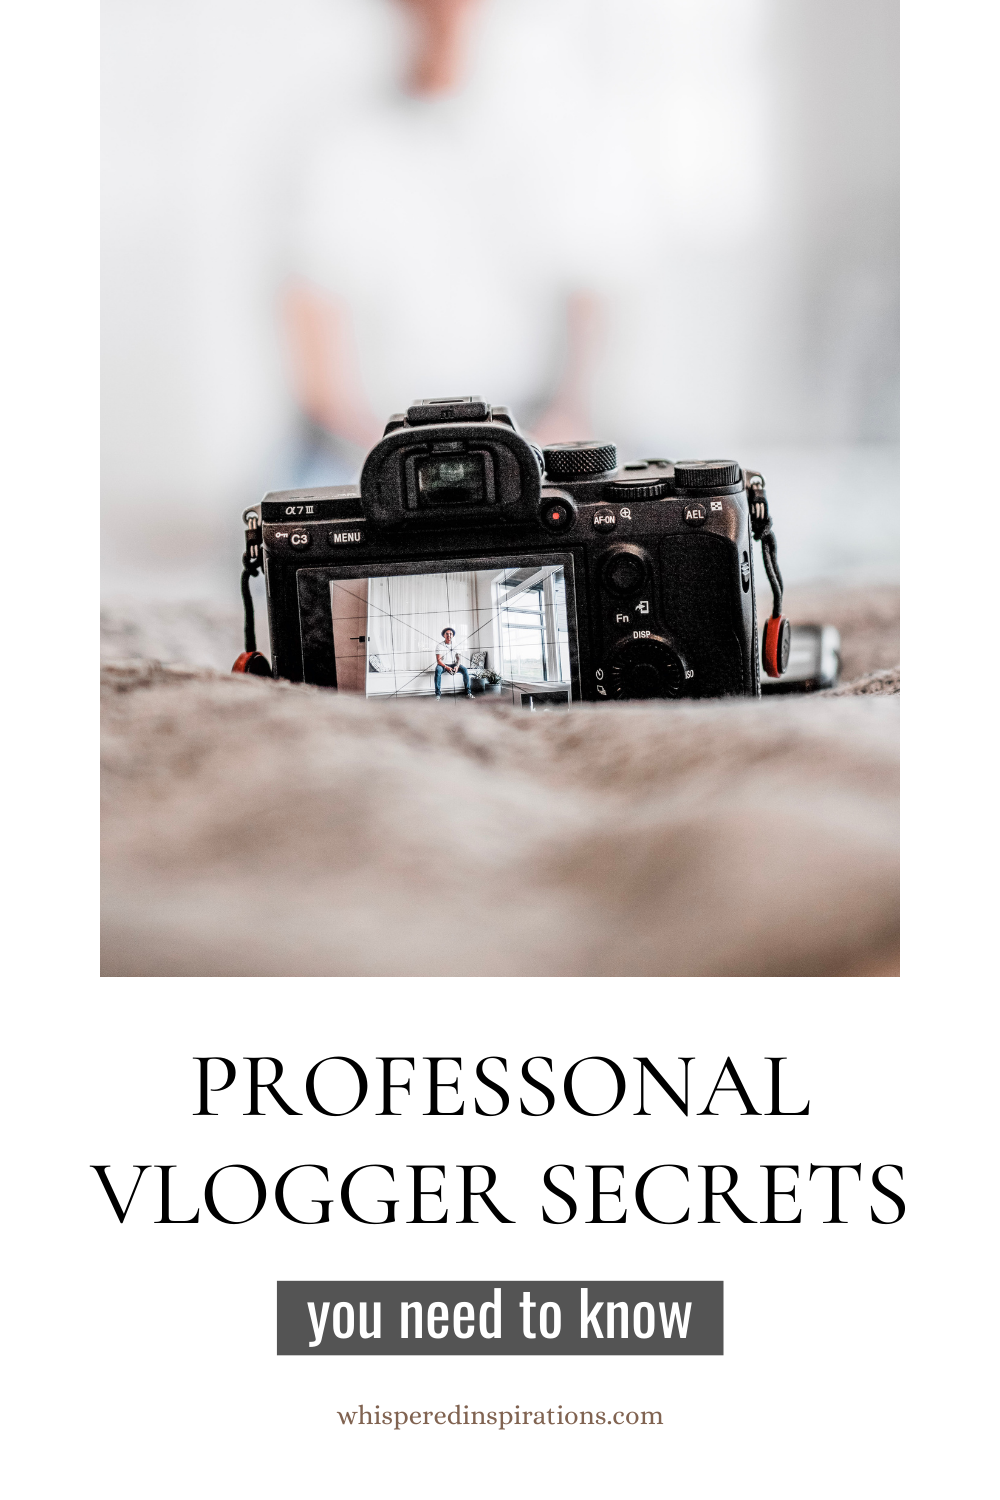 A man sets up his DSLR camera on a bed to record a vlog. This article covers professional travel vlogger secrets you need to know.